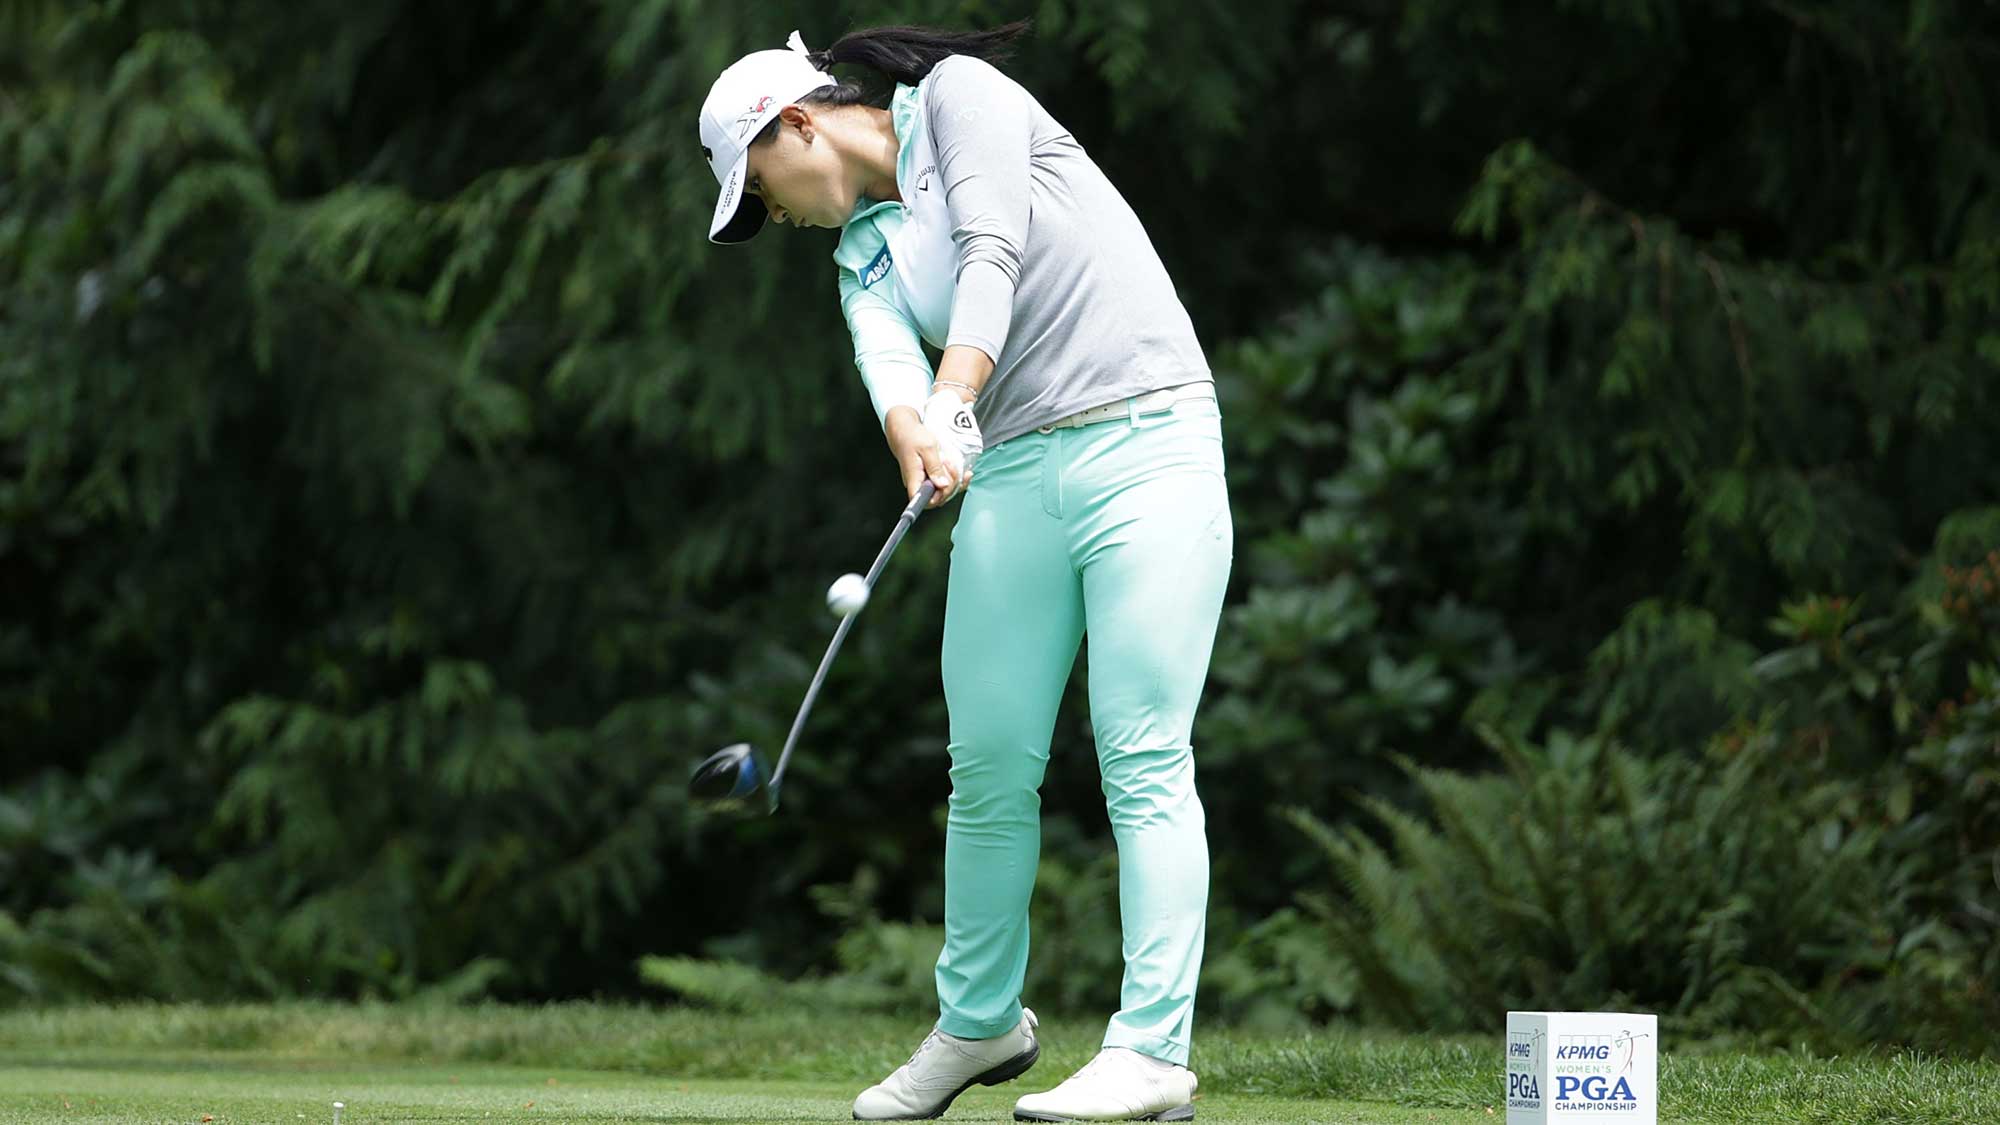 Lydia Ko of New Zealand hits a tee shot on the fourth hole during the final round of the KPMG Women's PGA Championship